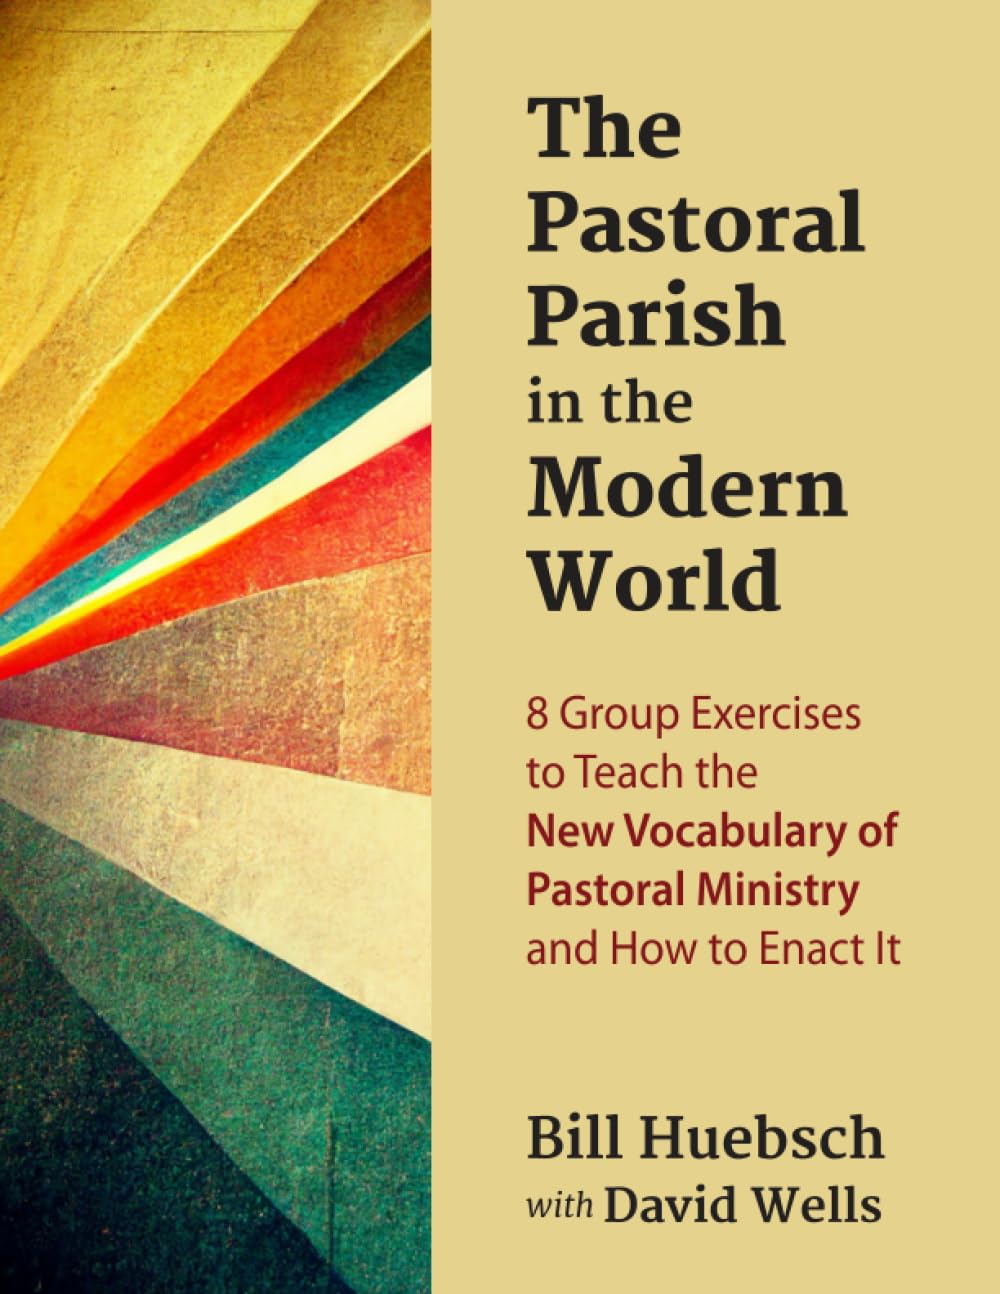 The Pastoral Parish in the Modern World